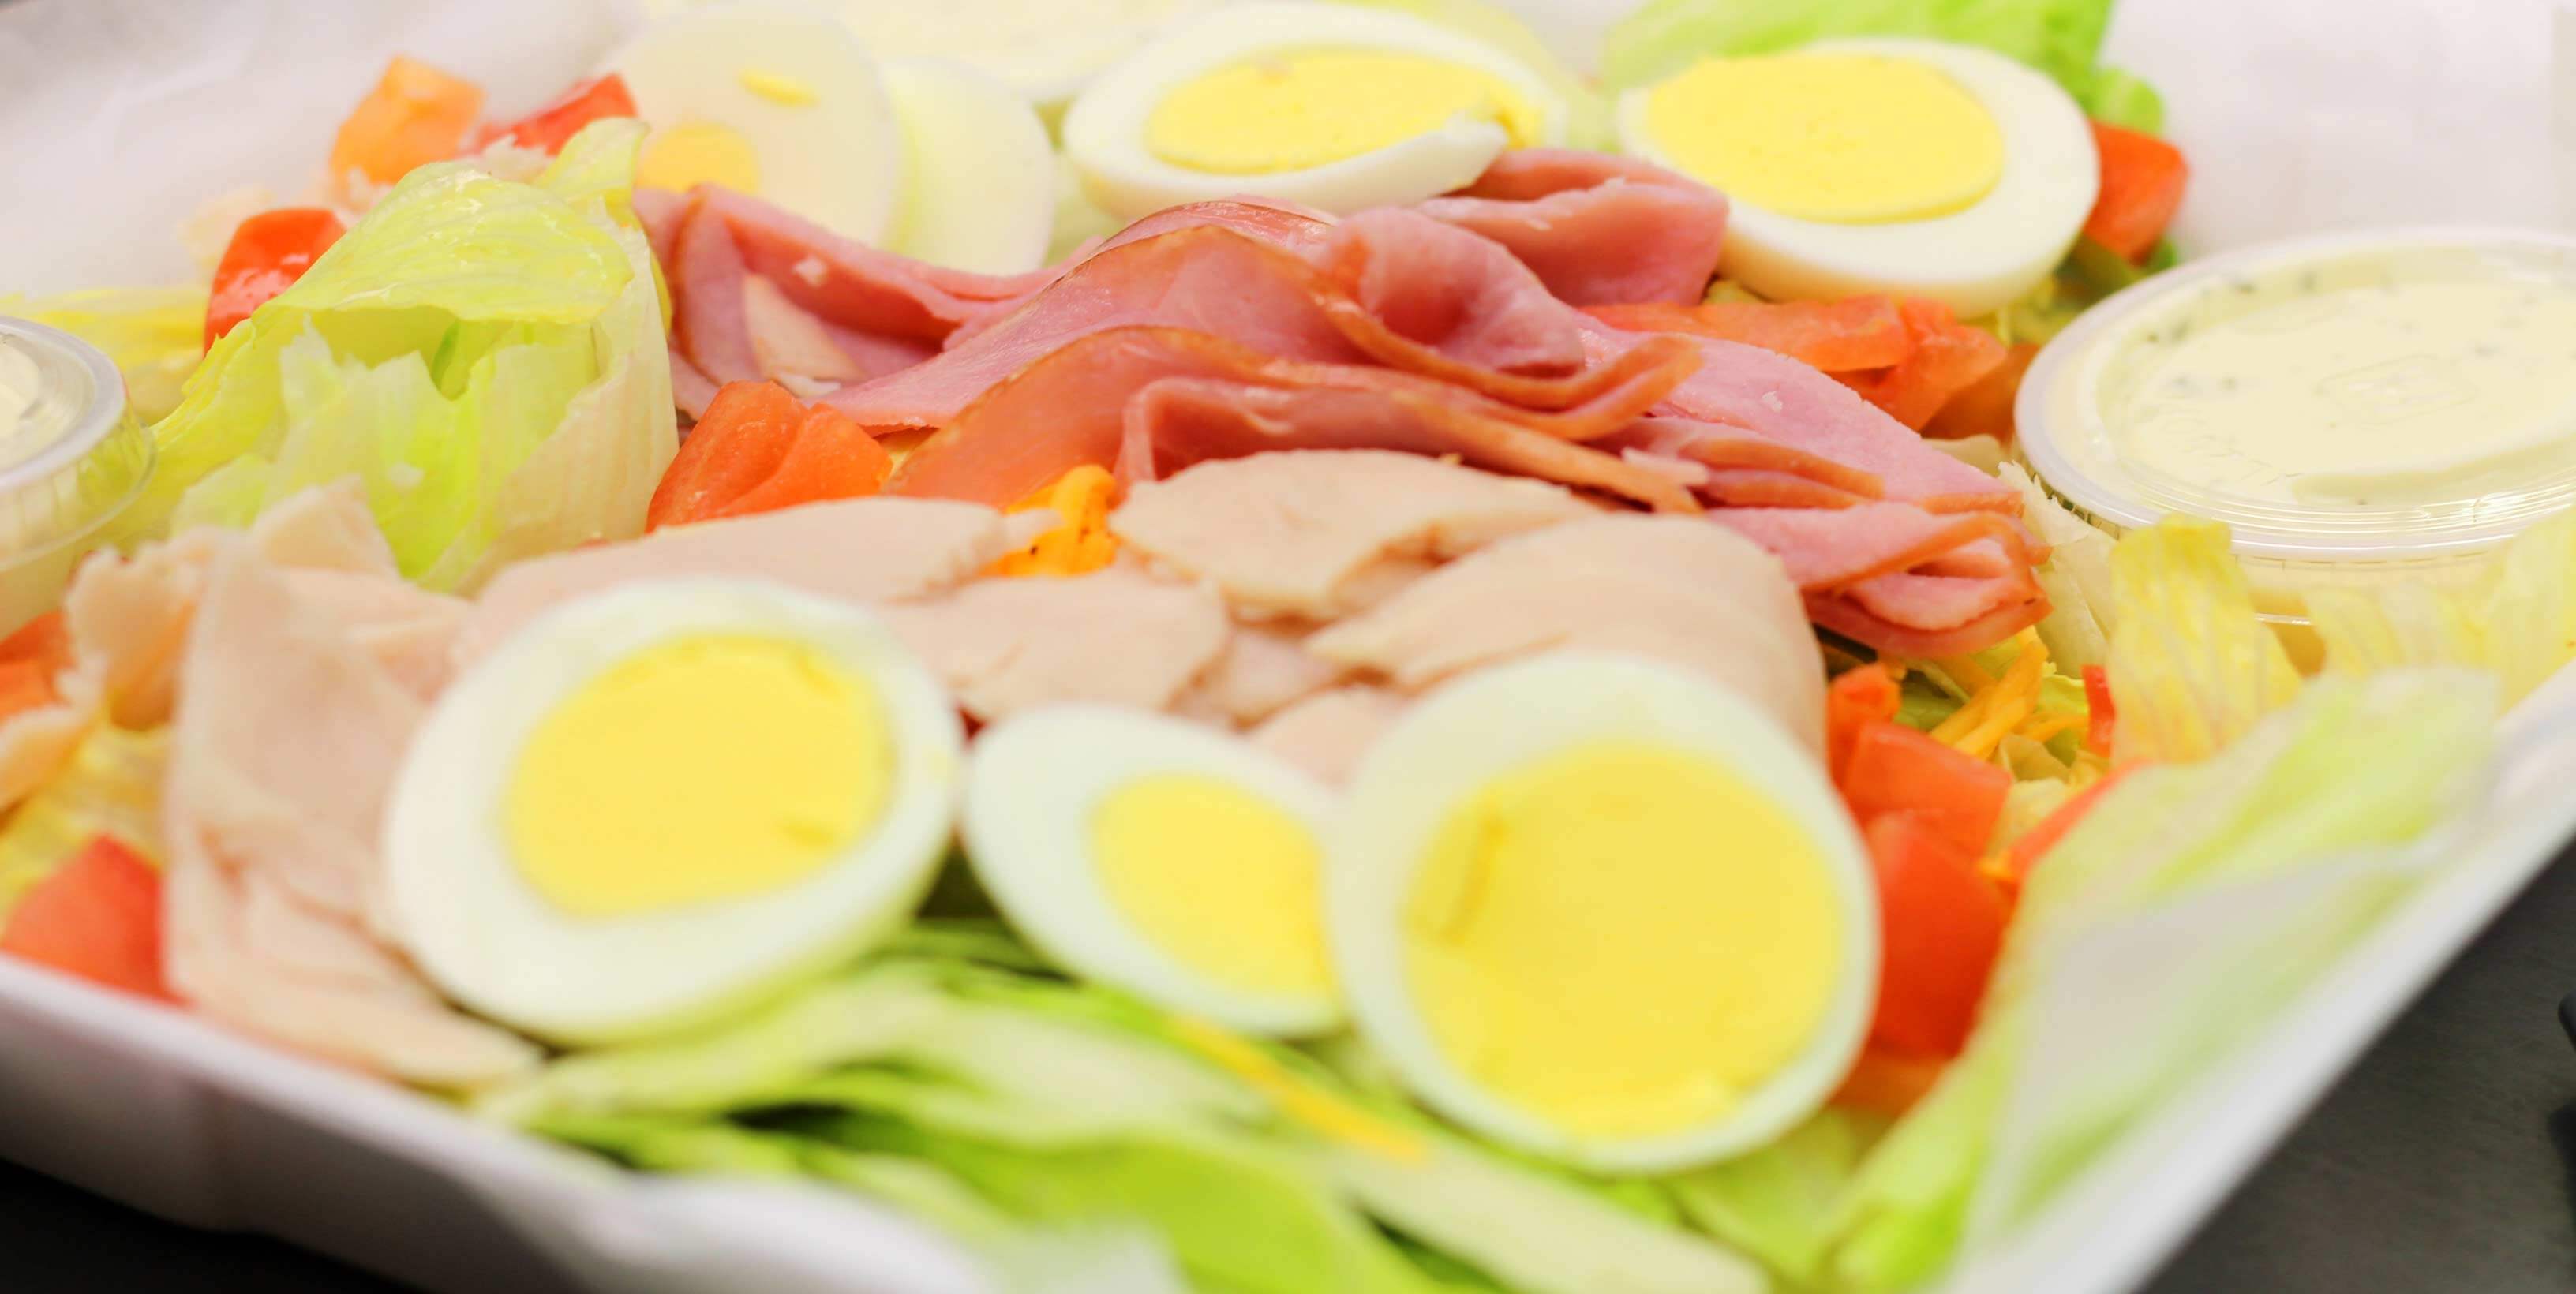 Cheif salad made up of sliced eggs, turkey, ham, bacon and lettuce